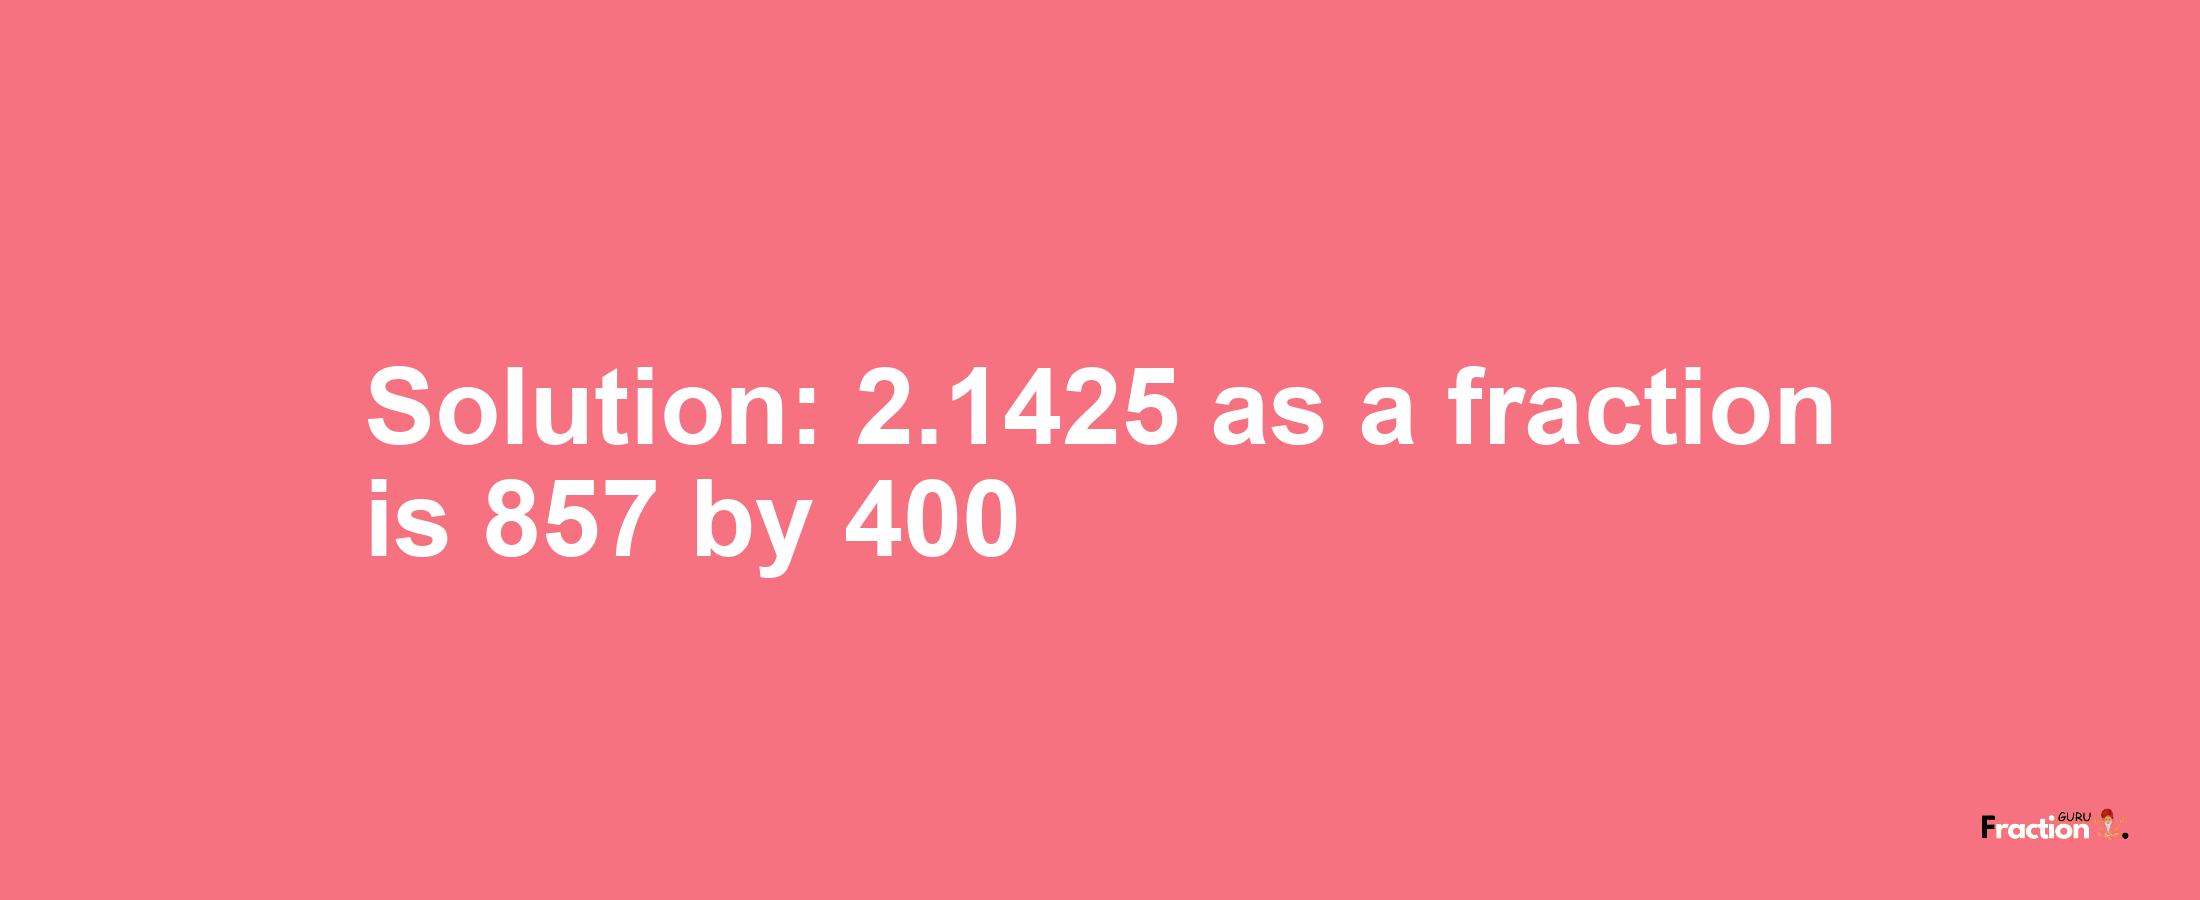 Solution:2.1425 as a fraction is 857/400